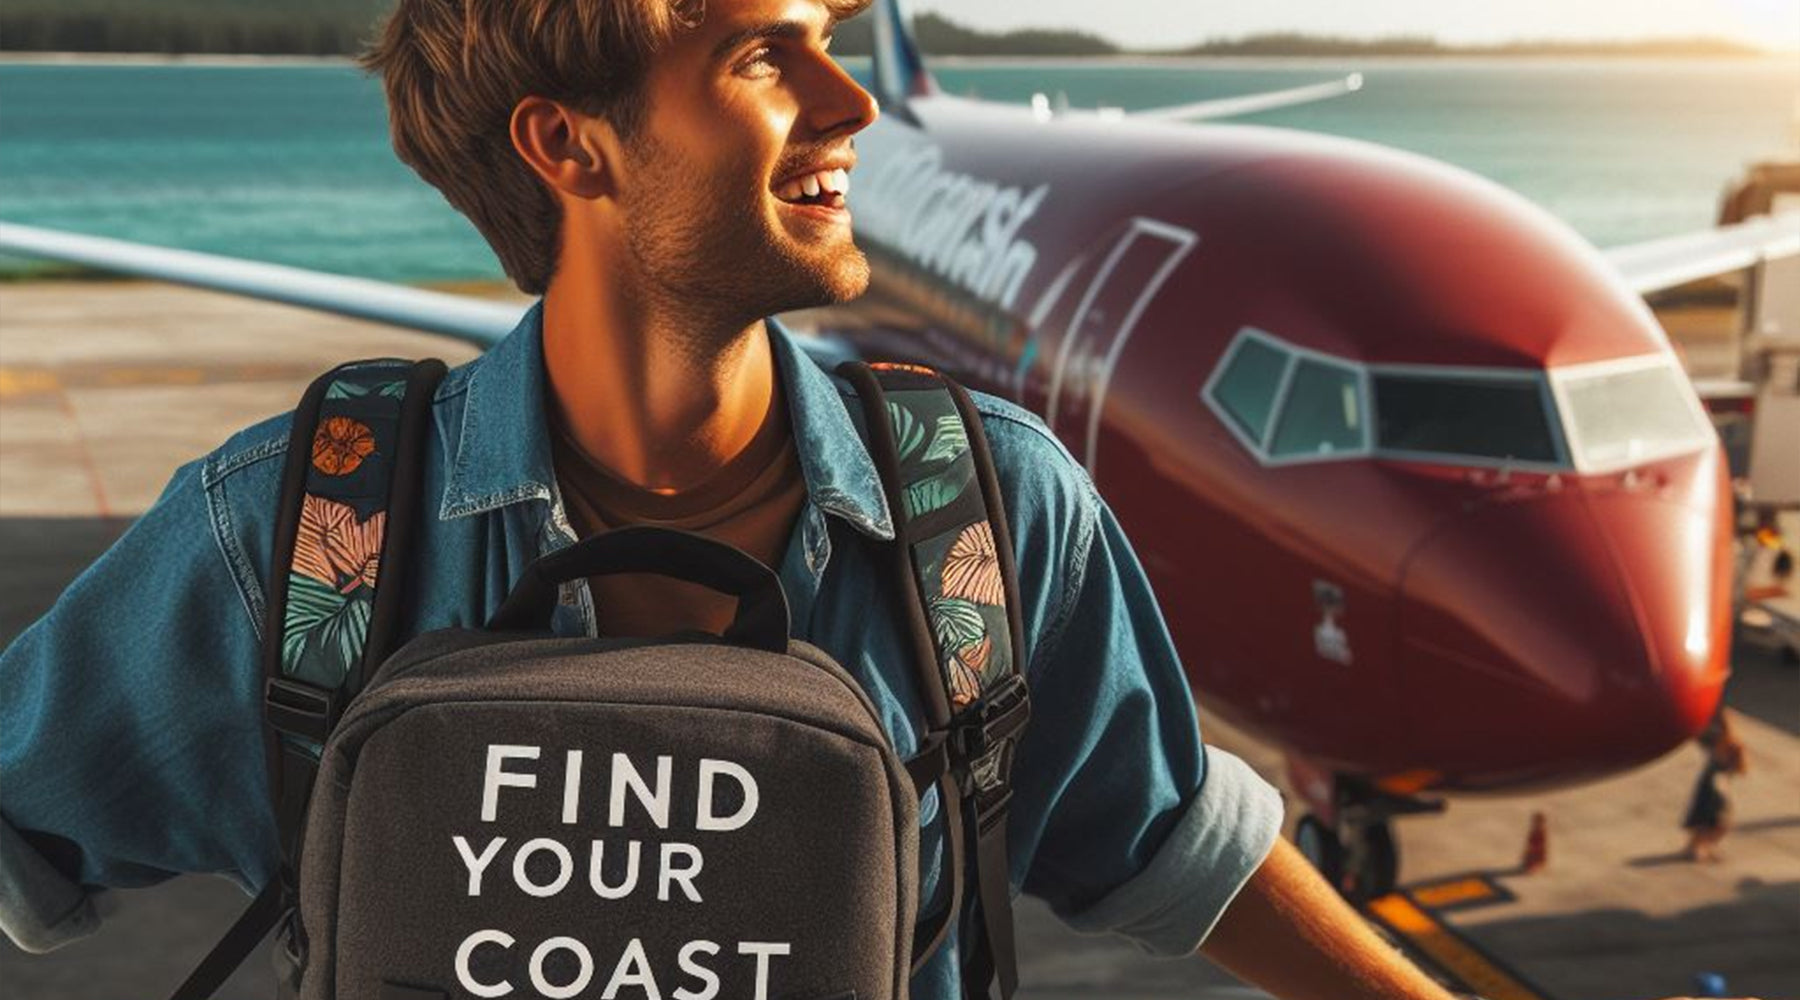 Find Your Coast Backpacks